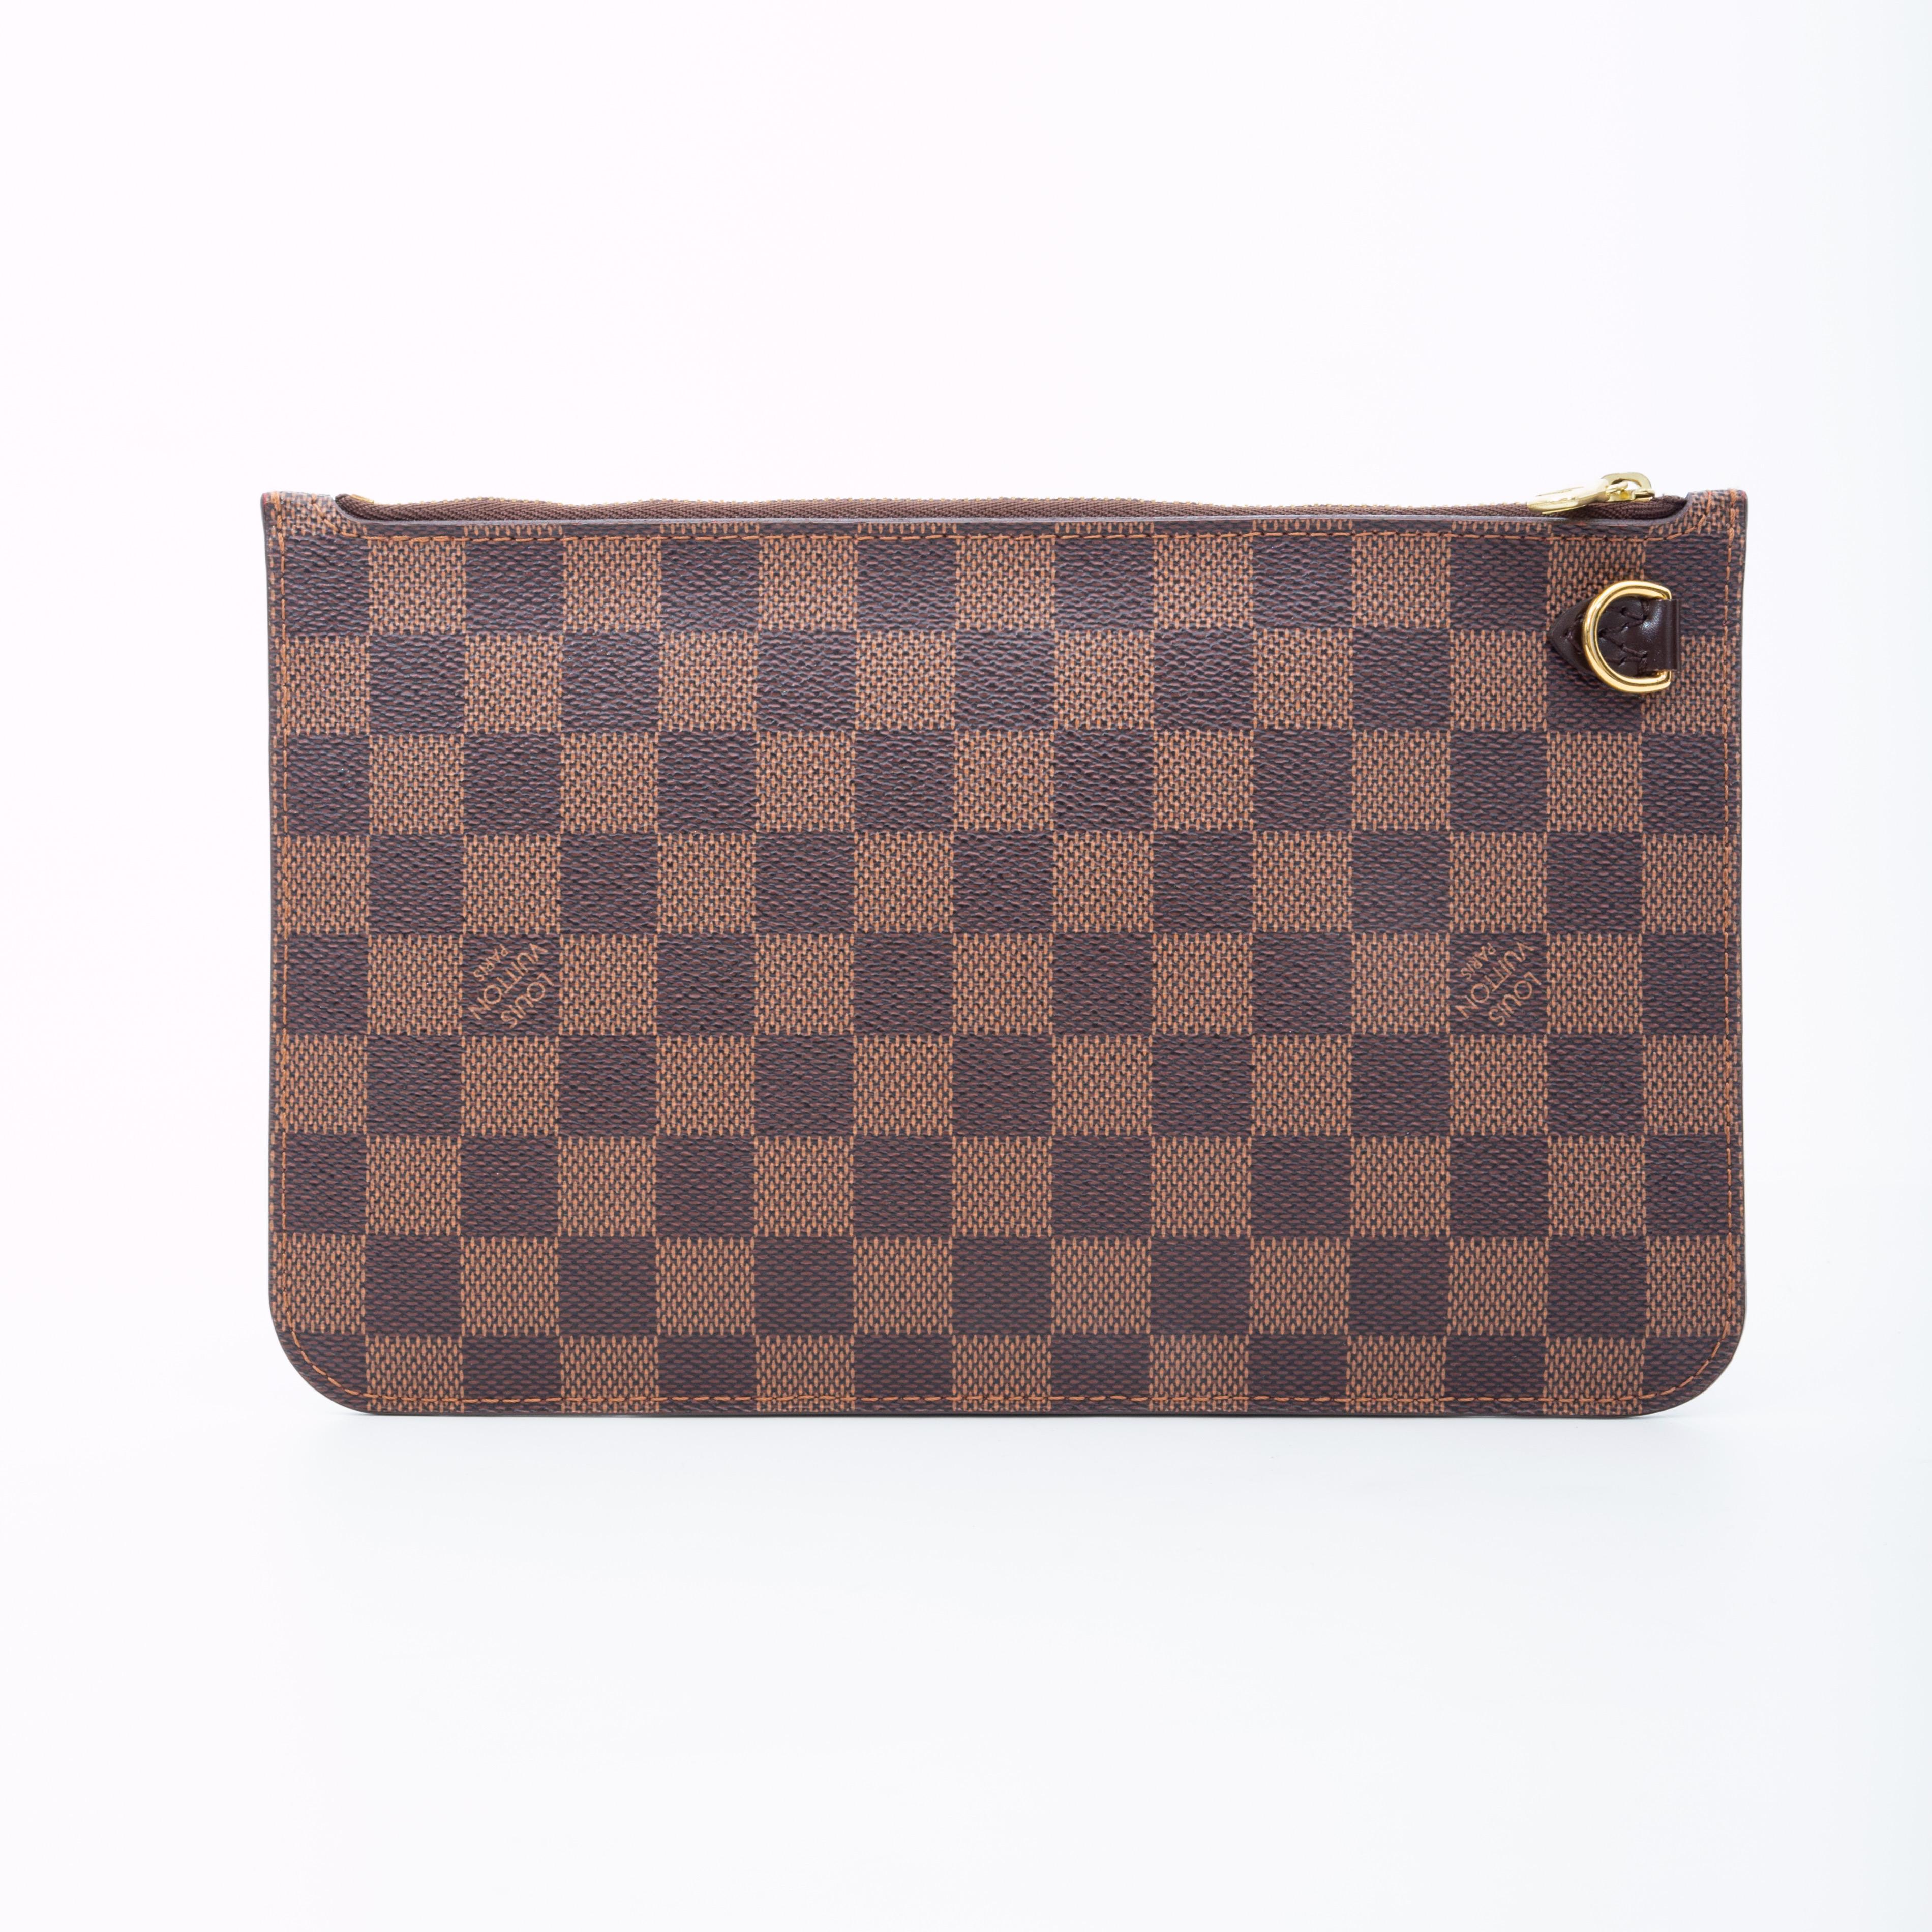 This clutch is made with brown Damier Ebene coated canvas and features leather details, gold tone hardware, top zip closure and red woven fabric lining with an interior slip pocket.

COLOR: Brown Damier Ebene
MATERIAL: Coated canvas
DATE CODE: